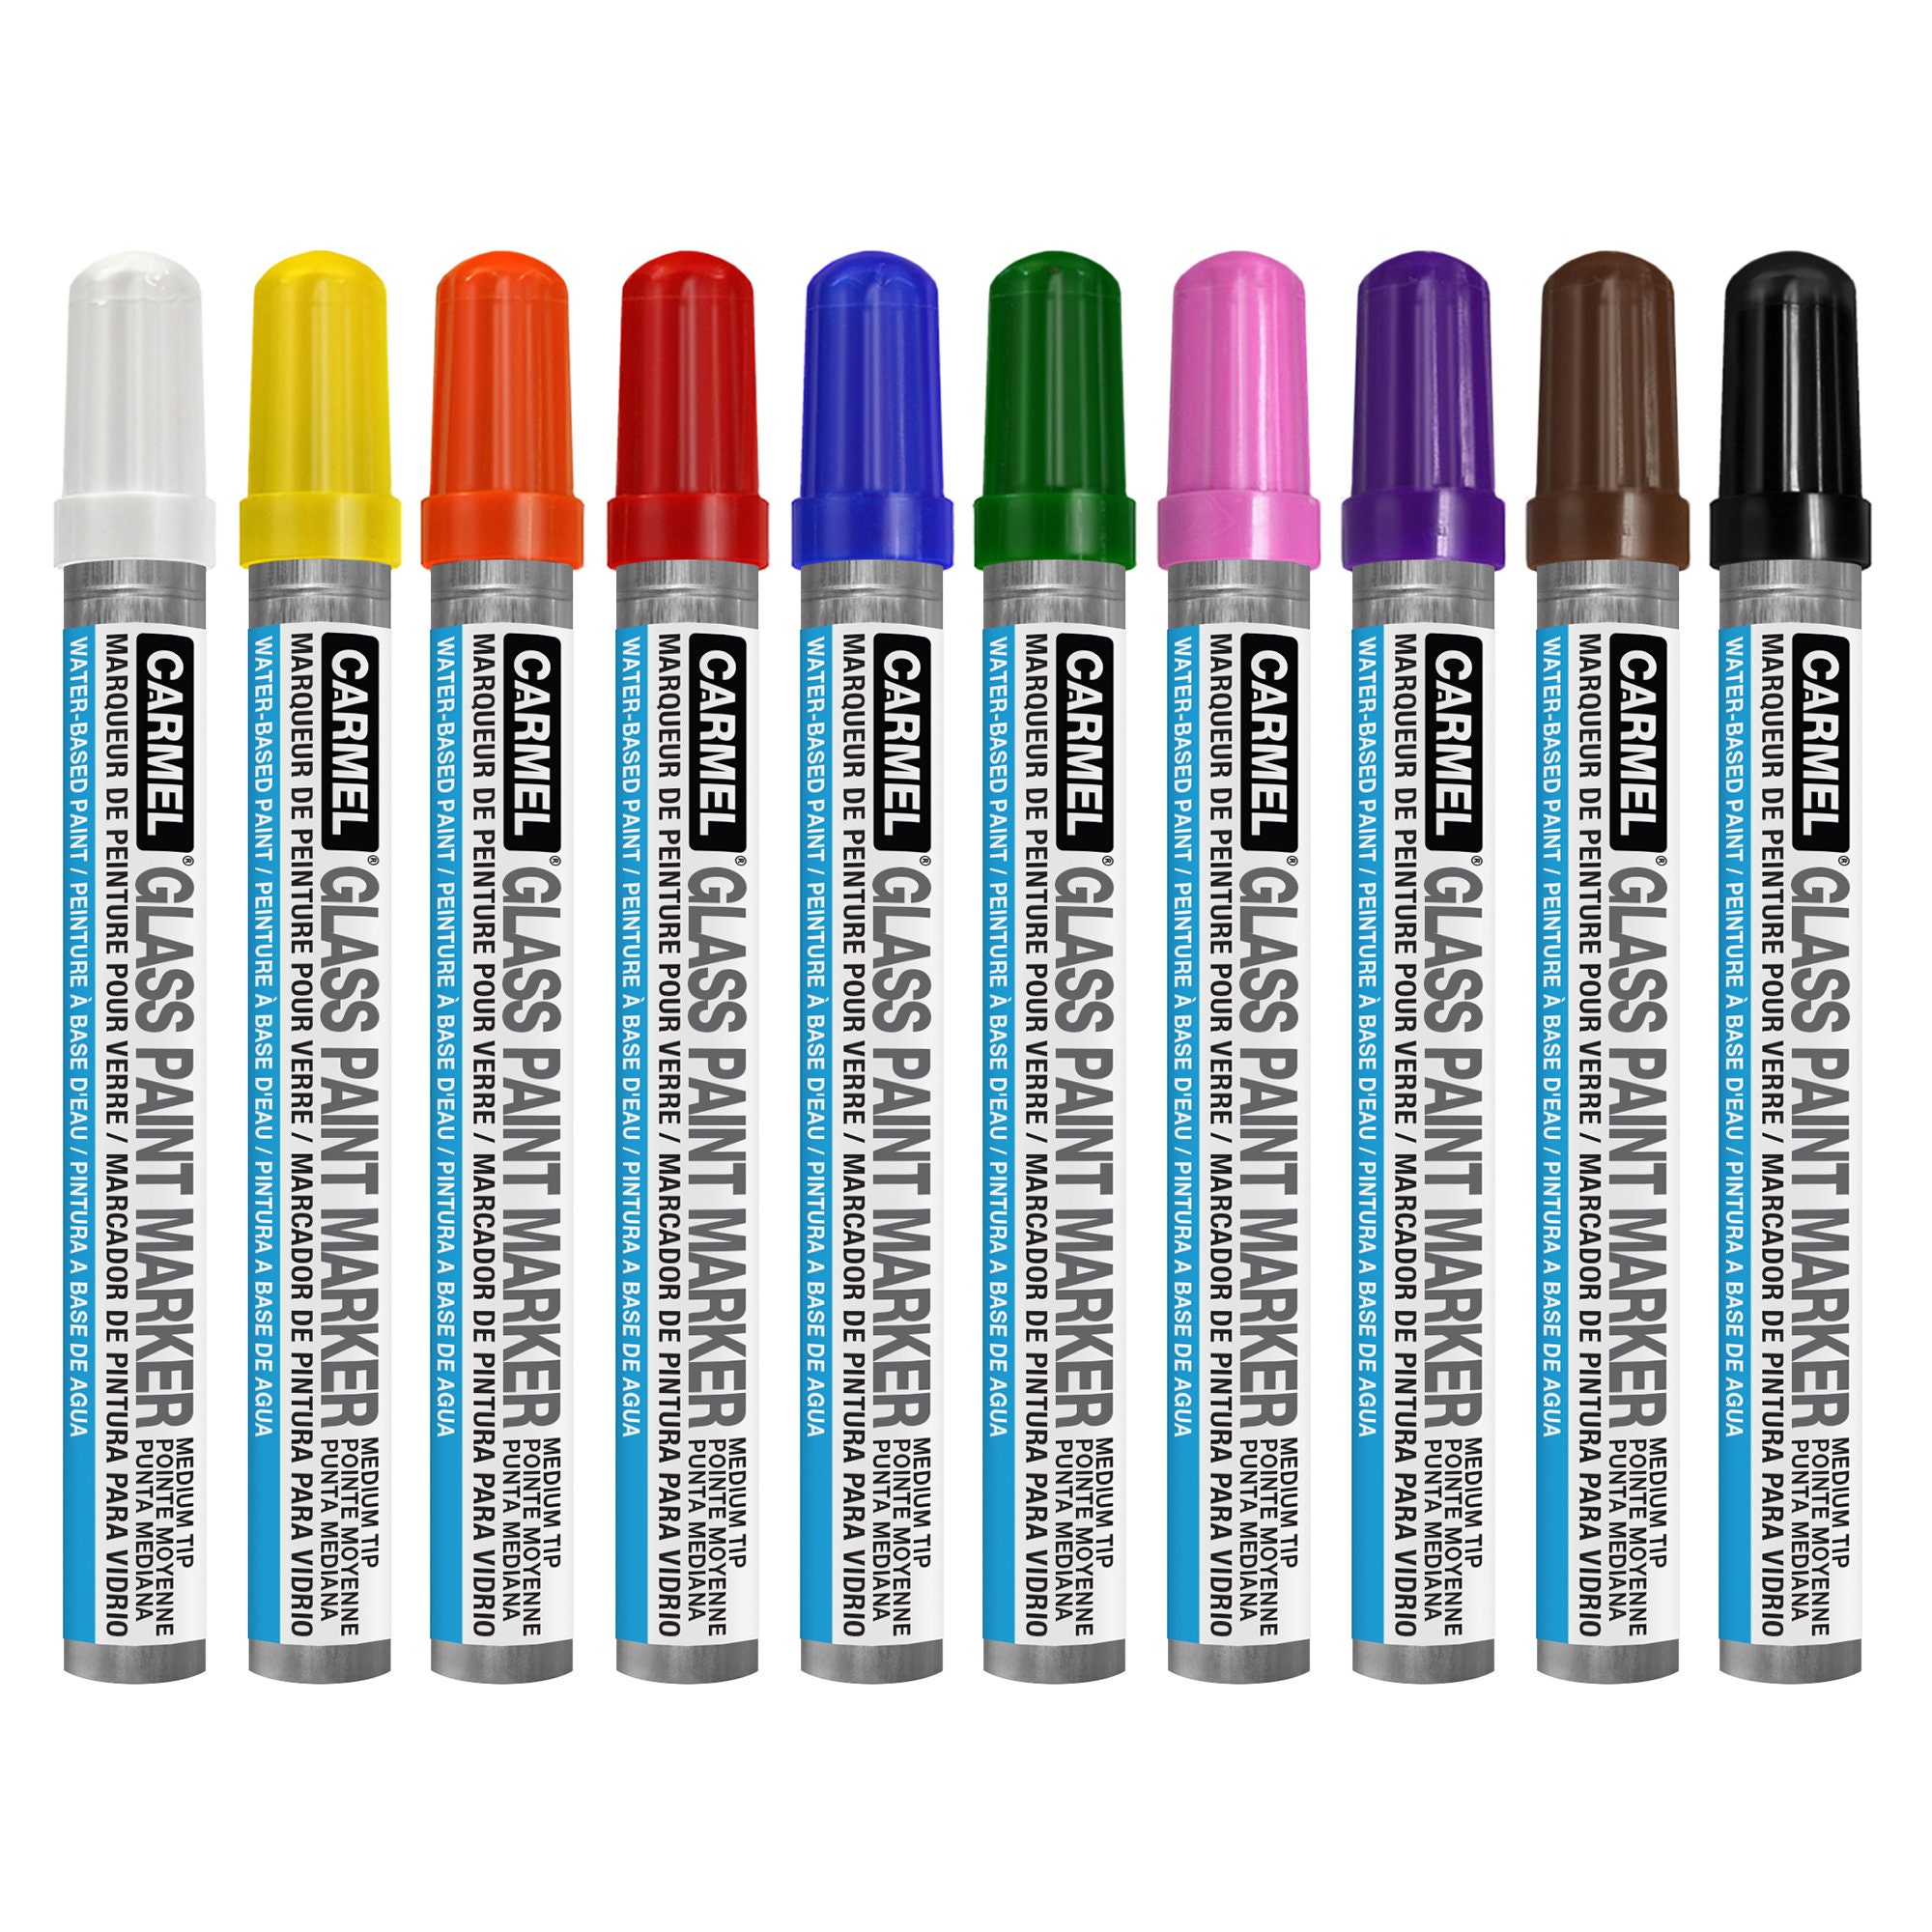 YISAN Magnetic Dry Erase Markers Ultra Fine Tip, 0.7mm, Extra Fine Point,  Whiteboard Markers with Erasers,11 Assorted Colors, Low Odor,12 Count,70559  